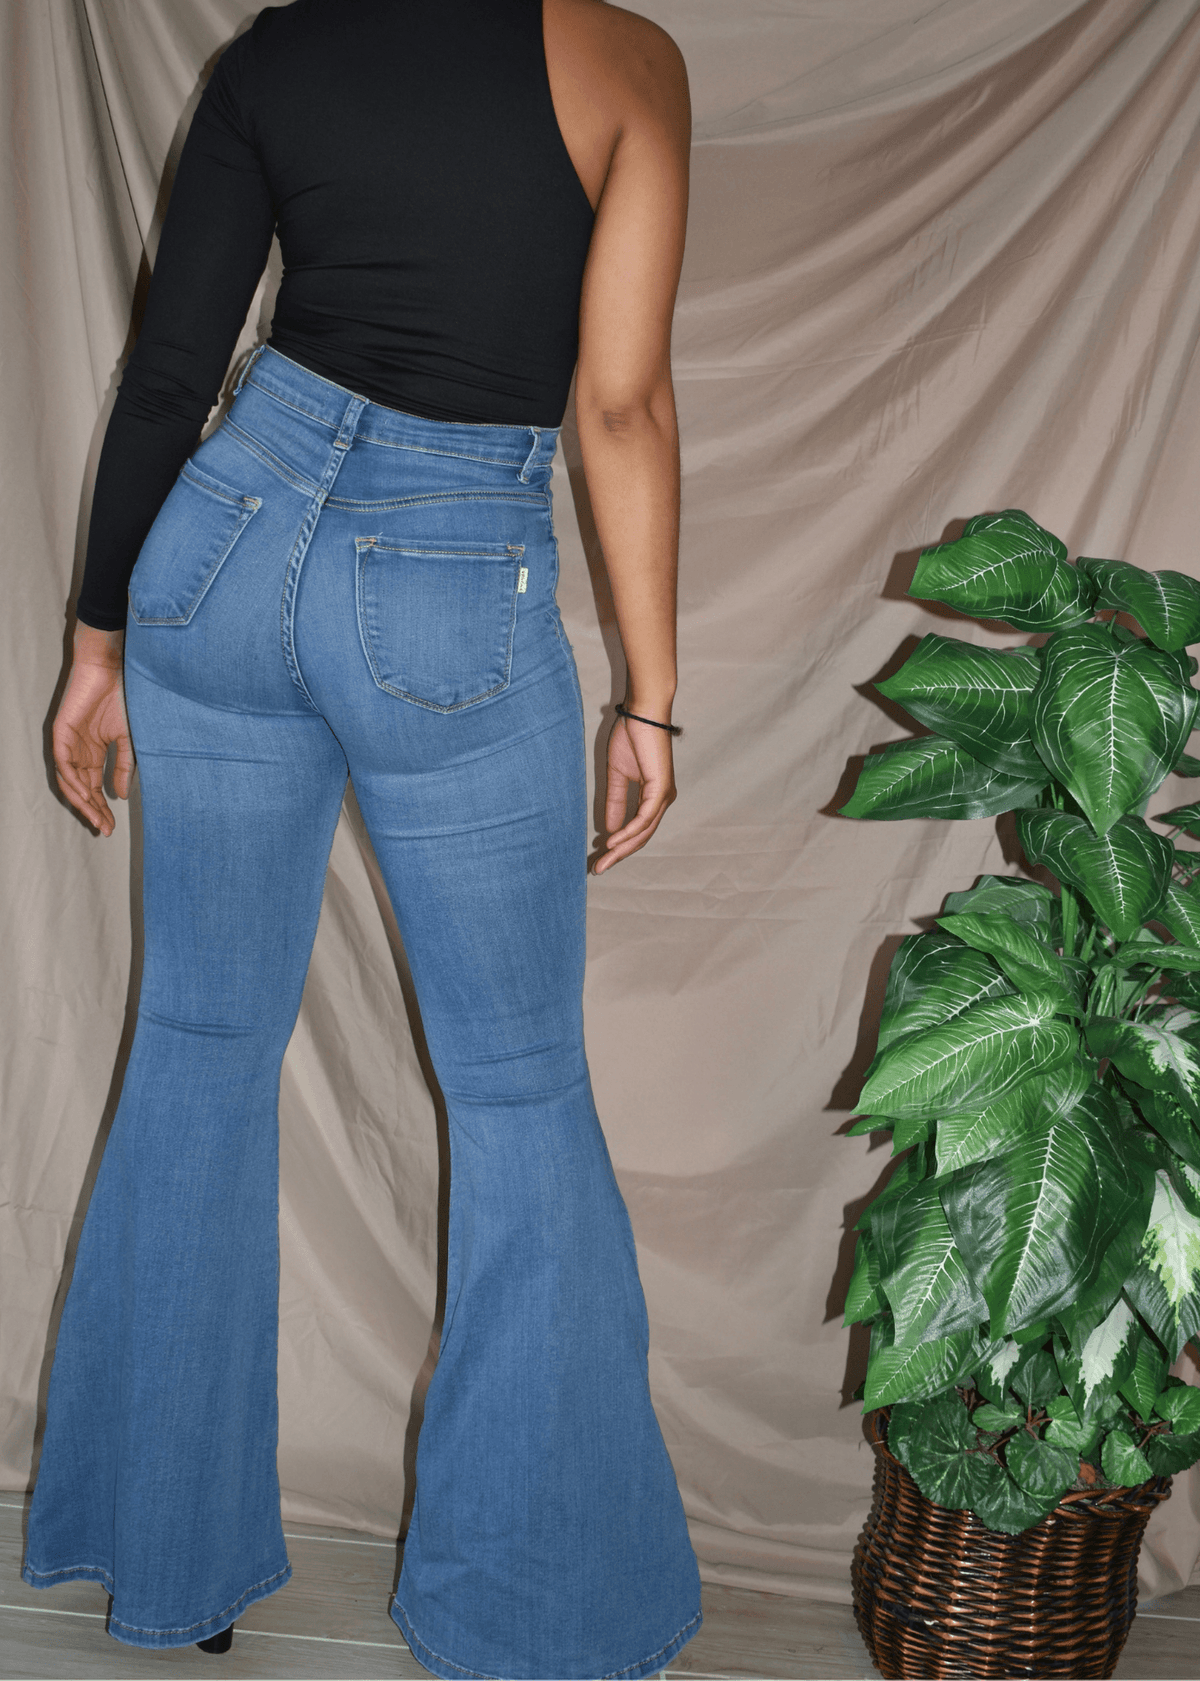 Get trendy with Fiesty Flare High Waisted Dark Blue Jeans - Bottoms available at ELLE TENAJ. Grab yours for $20.00 today!